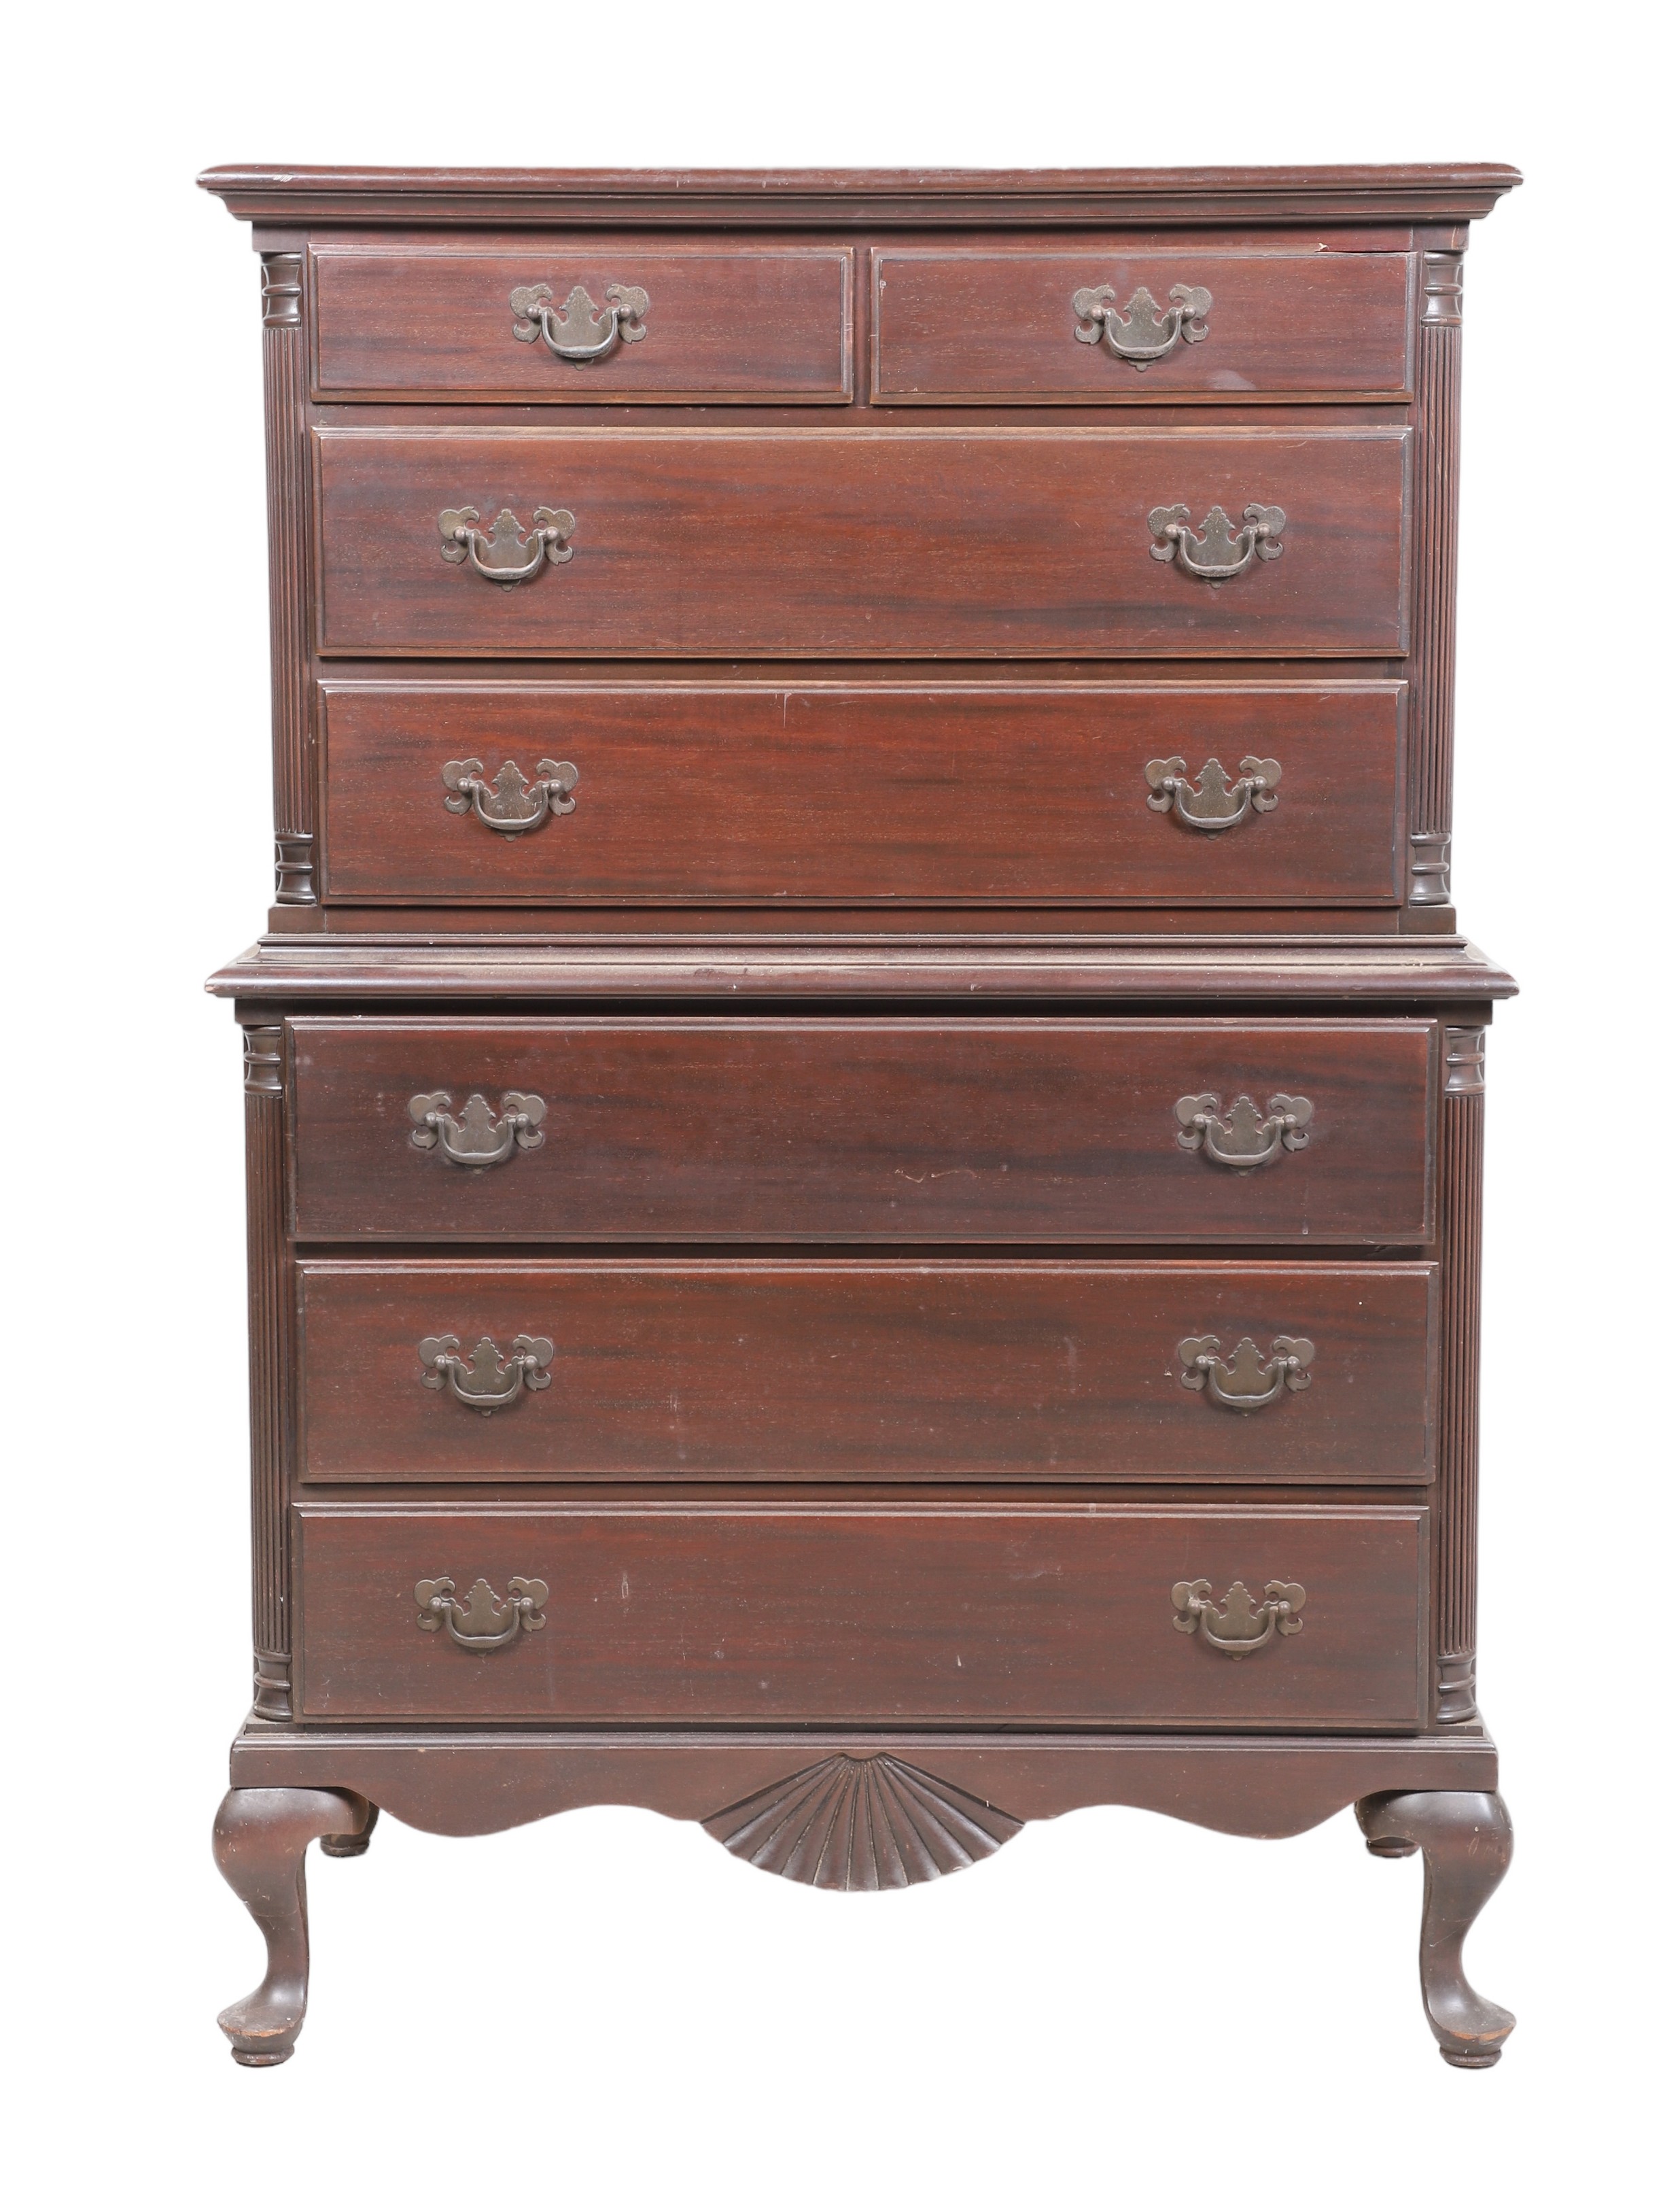 Queen Anne style mahogany chest 2e1009